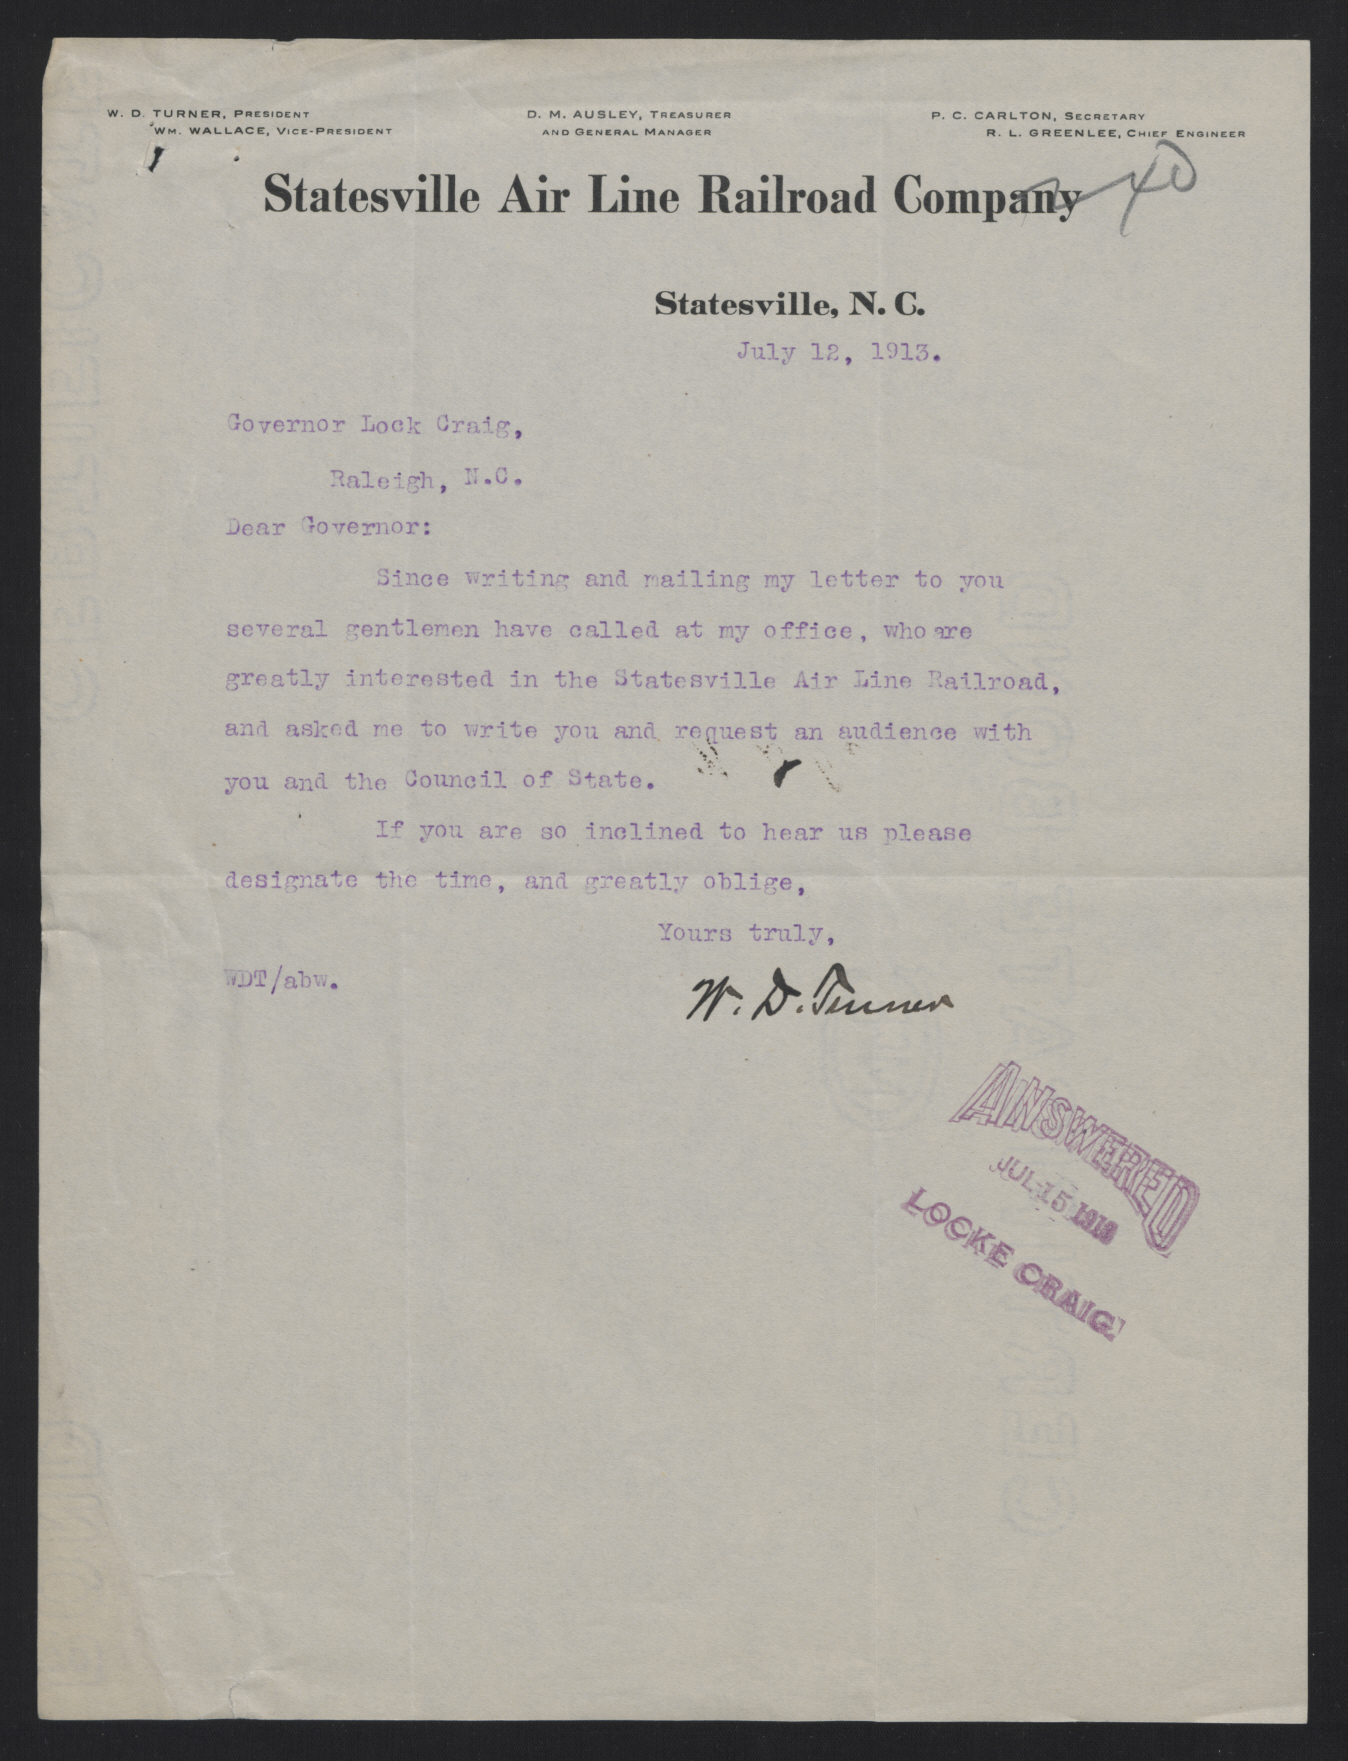 Letter from Turner to Craig, July 12, 1913